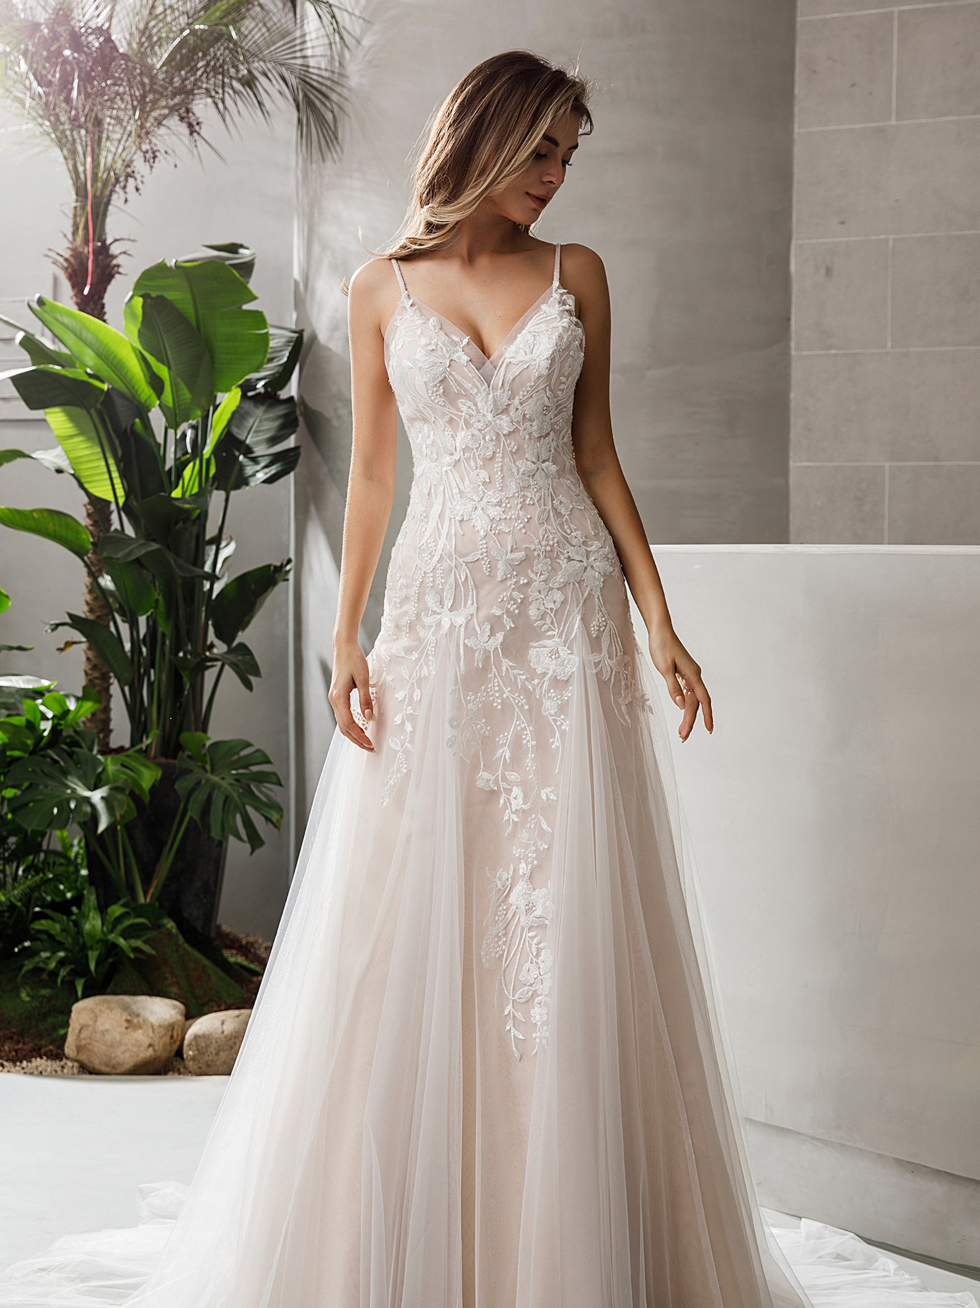 Inspired Lace Wedding Dress With Flattering Silhouette